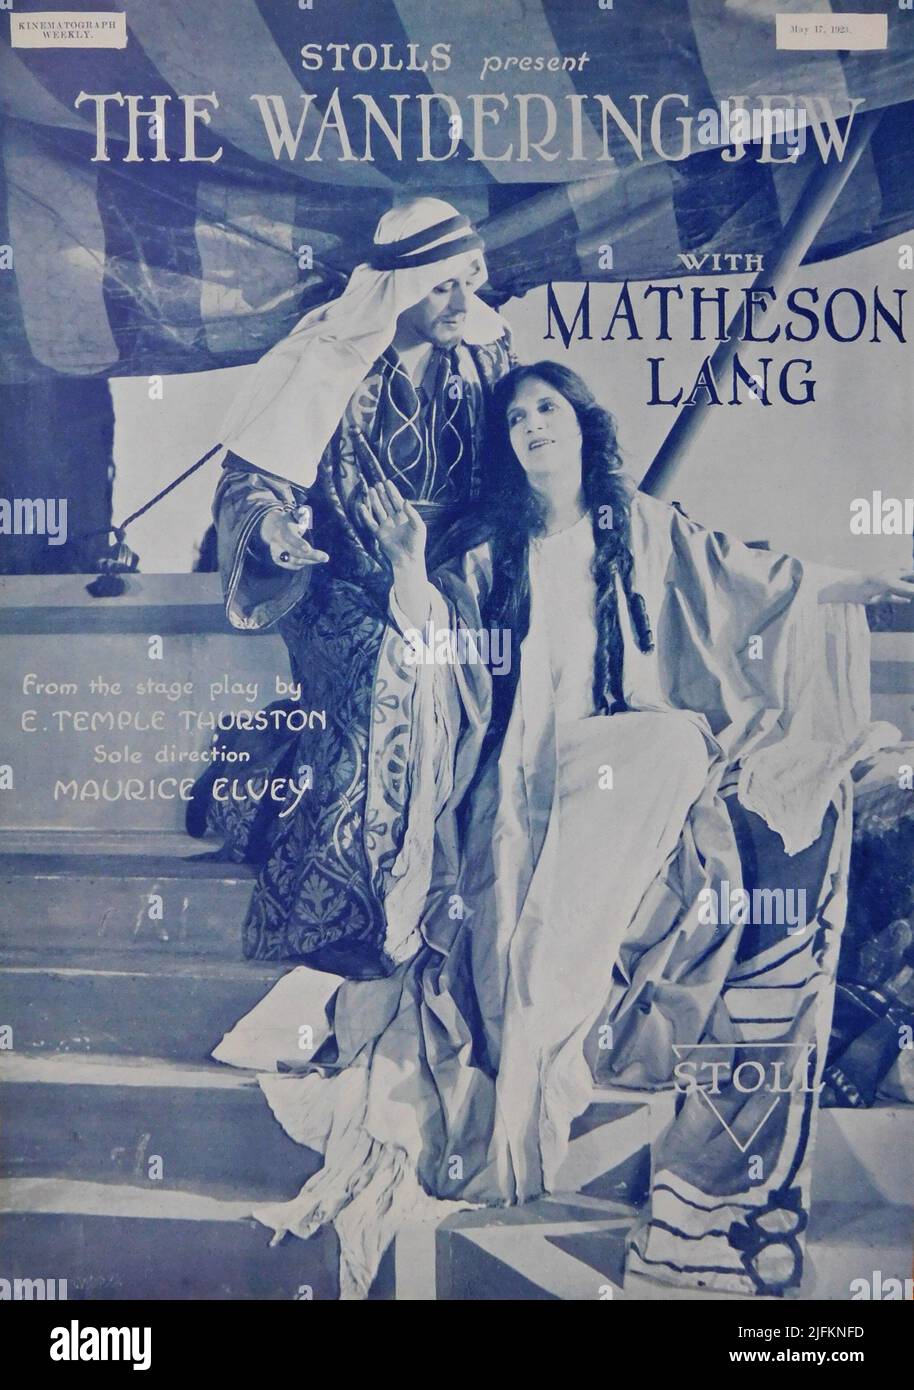 MATHESON LANG and NELLIE HUTIN BRITTON in THE WANDERING JEW 1923 director MAURICE ELVEY from the play by E. Temple Thurston Stoll Picture Productions Stock Photo